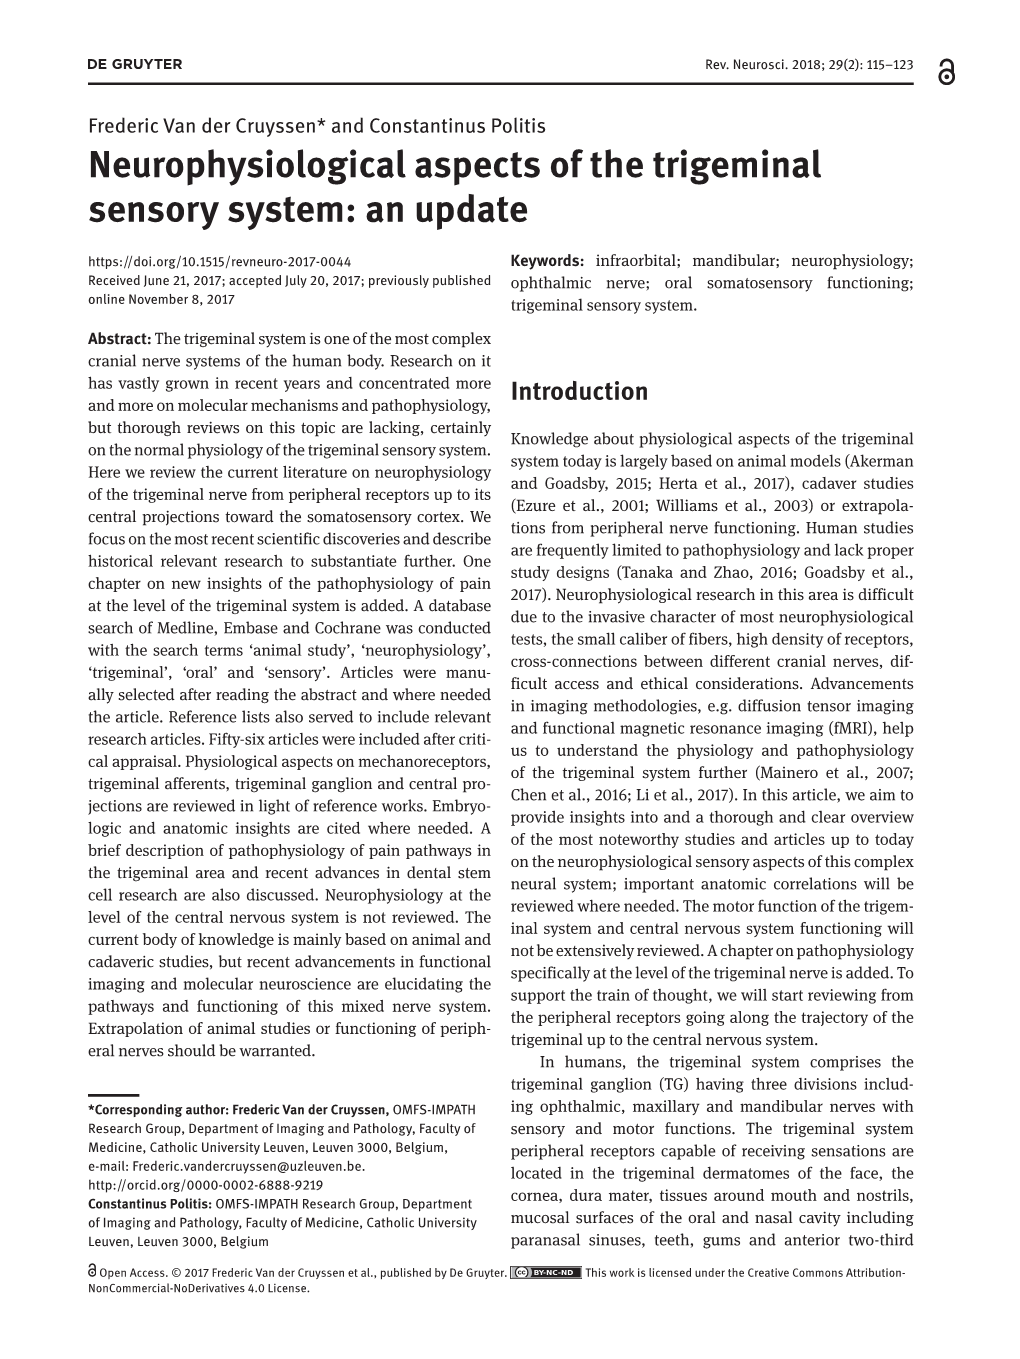 Neurophysiological Aspects of the Trigeminal Sensory System: an Update